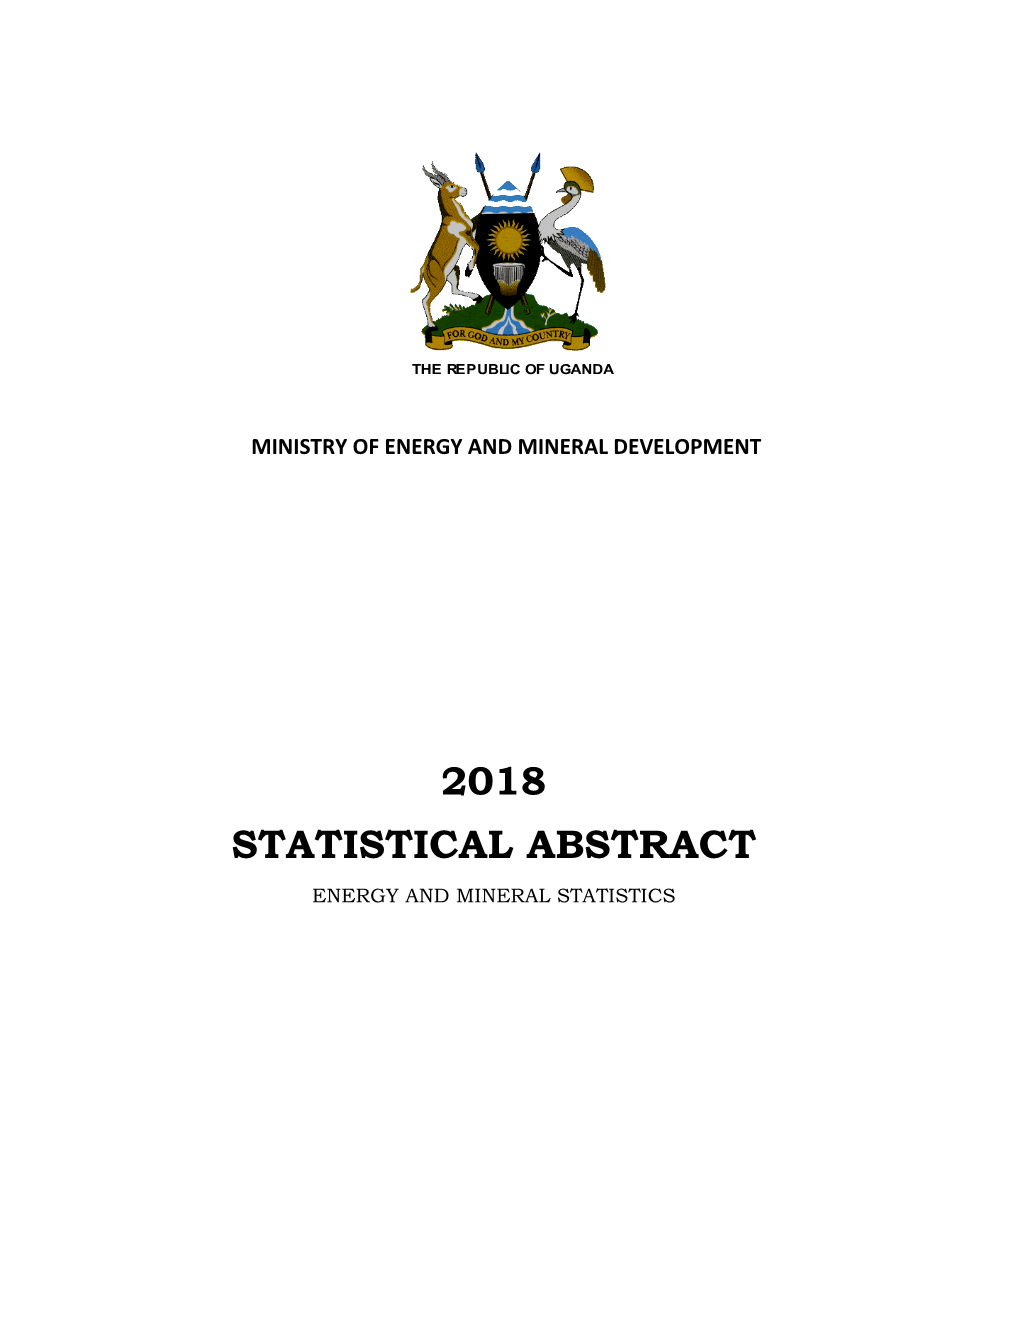 2018 Statistical Abstract Encompasses Statistics Produced by the Energy, Petroleum and Minerals Sub Sectors, for the Year Ending December 2018